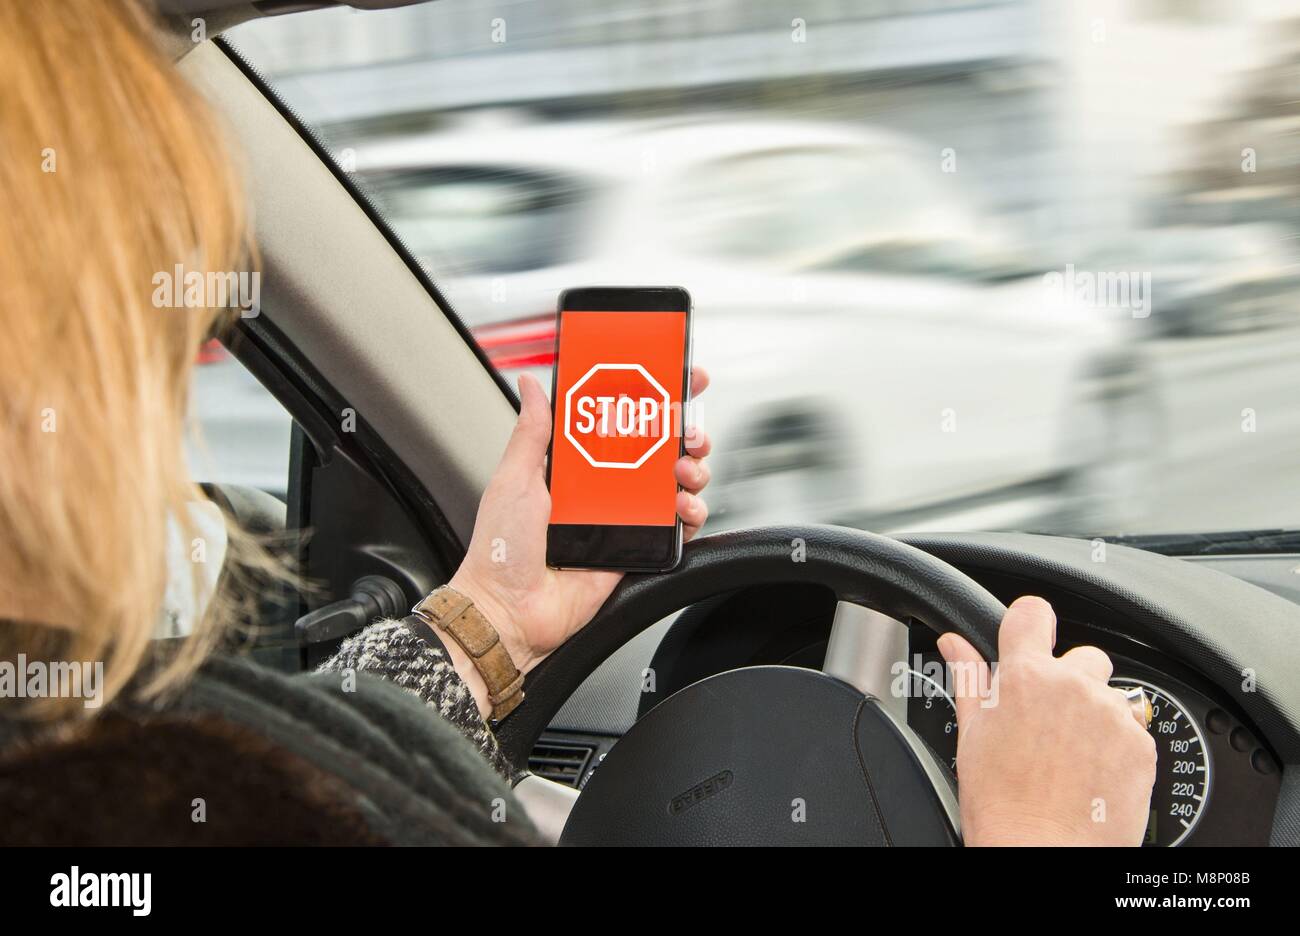 Woman holds a smartphone with stop sign in her hand while driving | usage worldwide Stock Photo